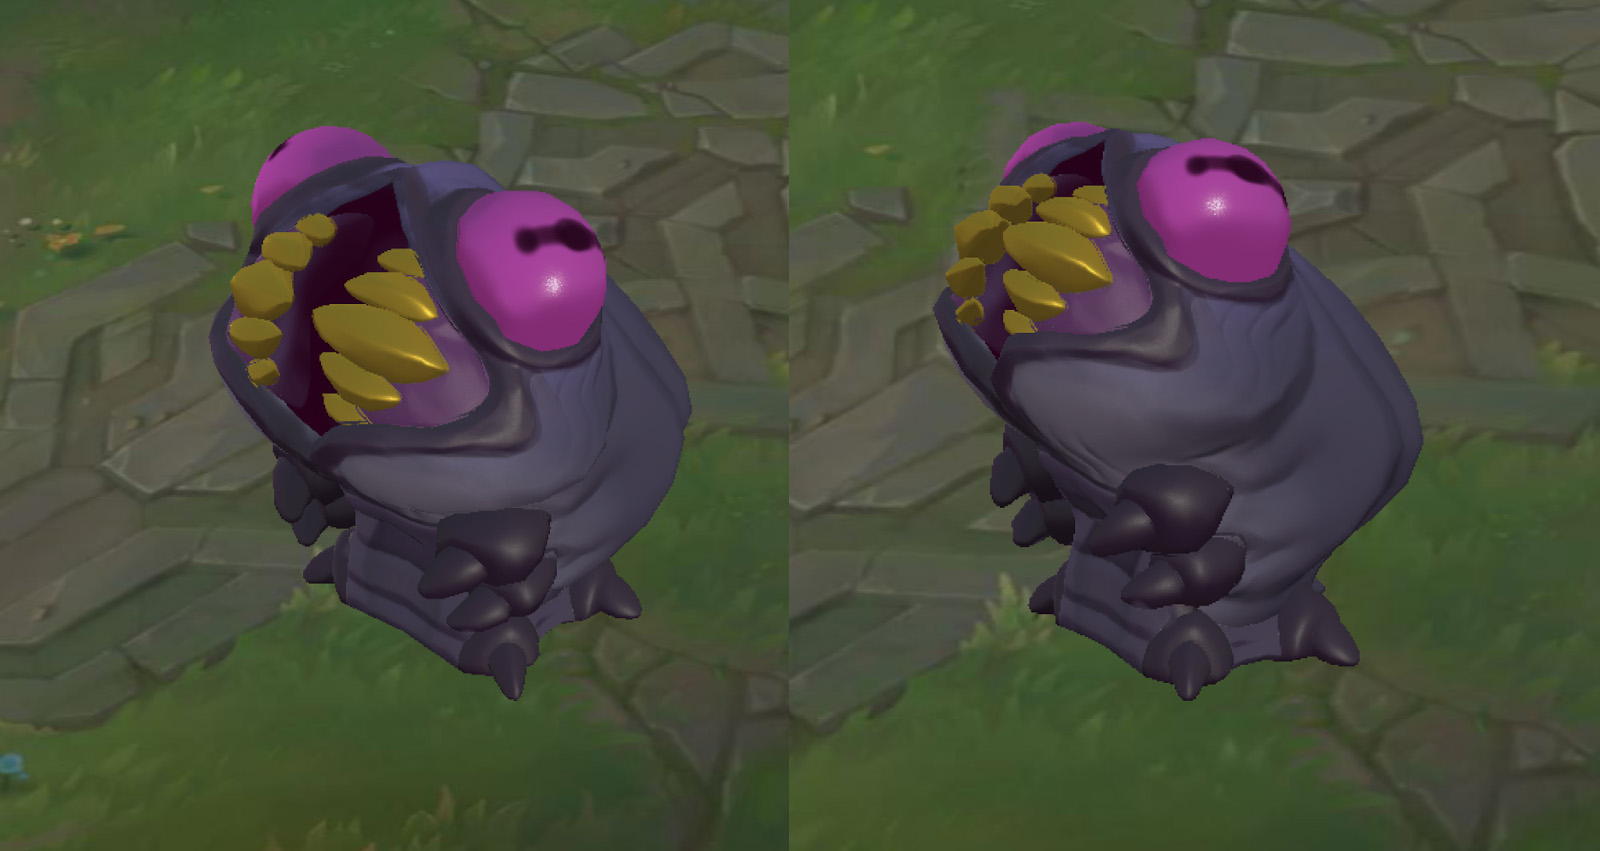 The new Voidgrub objective replaces Rift Herald in the Baron pit for the opening minutes of a match. Voidgrubs and their parasitic Voidmite spawn will continuously emerge from the pit and must be warded off to eventually release Herald later on.